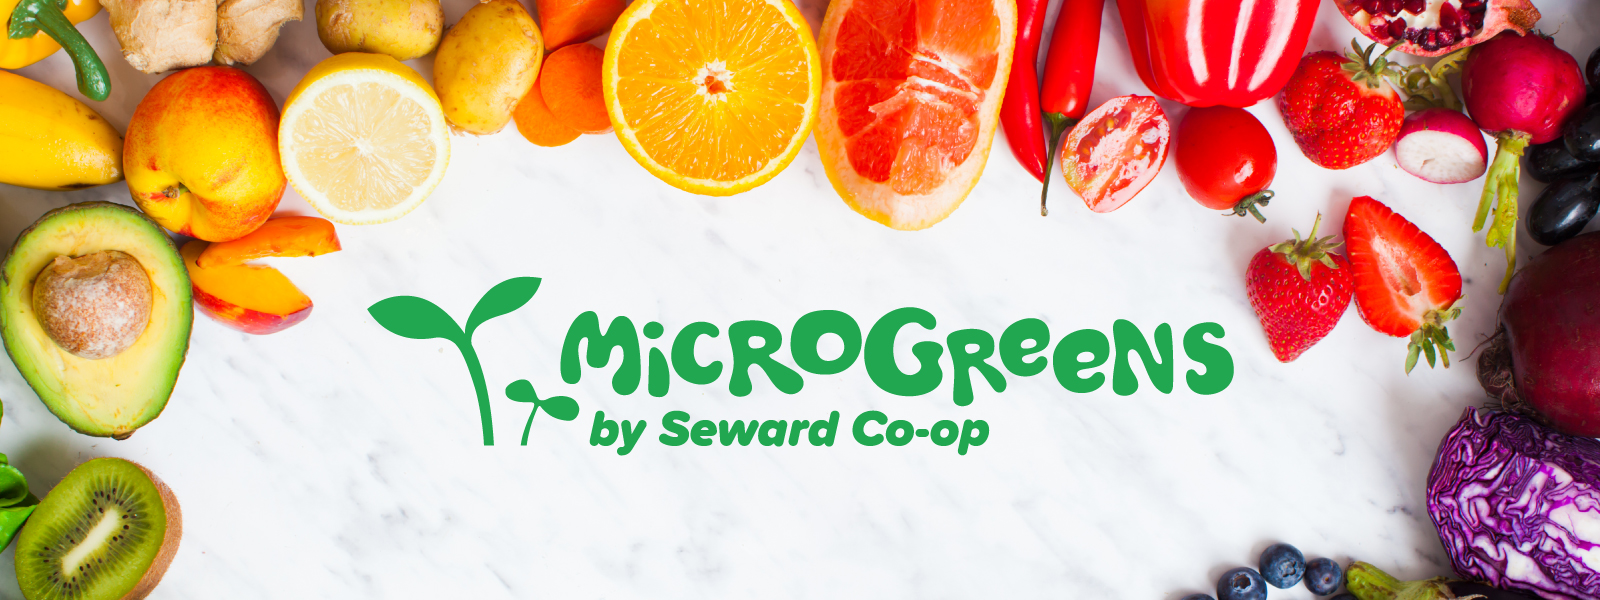 Colorful veggies and fruits surrounding the text "Microgreens by Seward Co-op"